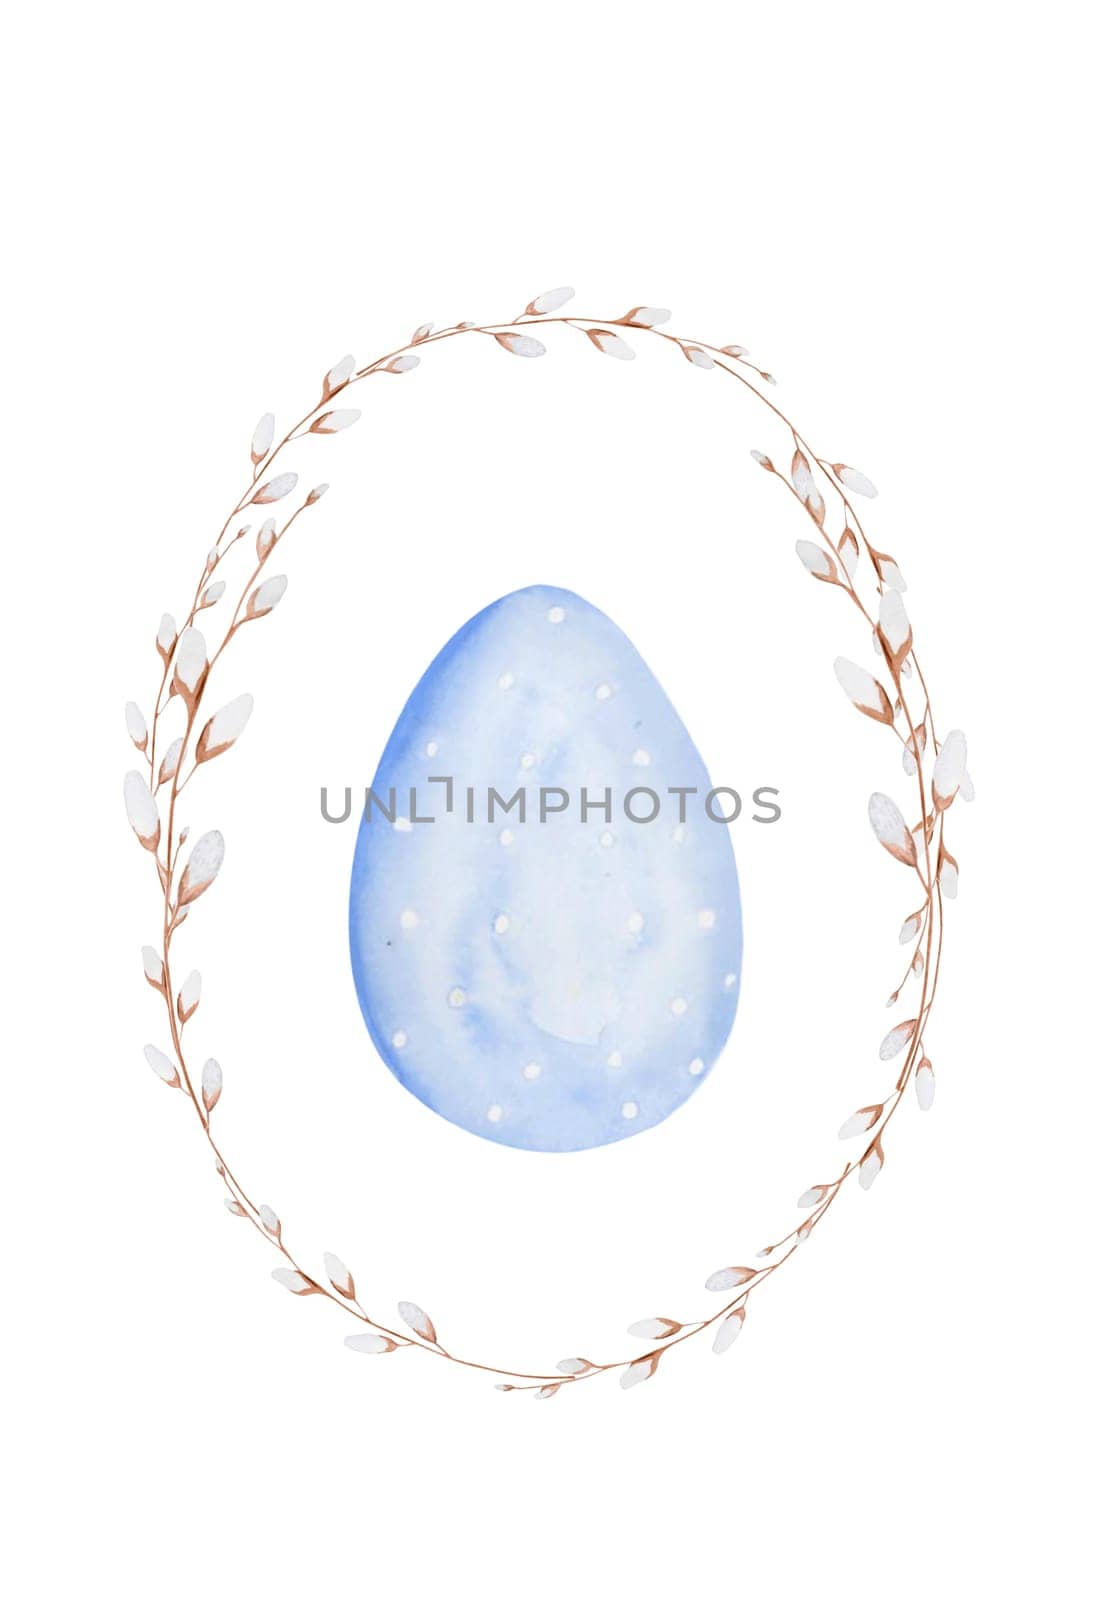 Watercolor Easter drawing card template with a blue pastel colored egg in a frame of willow branches. For designing cute cards and invitations. Isolate on a white background, ready-made postcard. High quality illustration